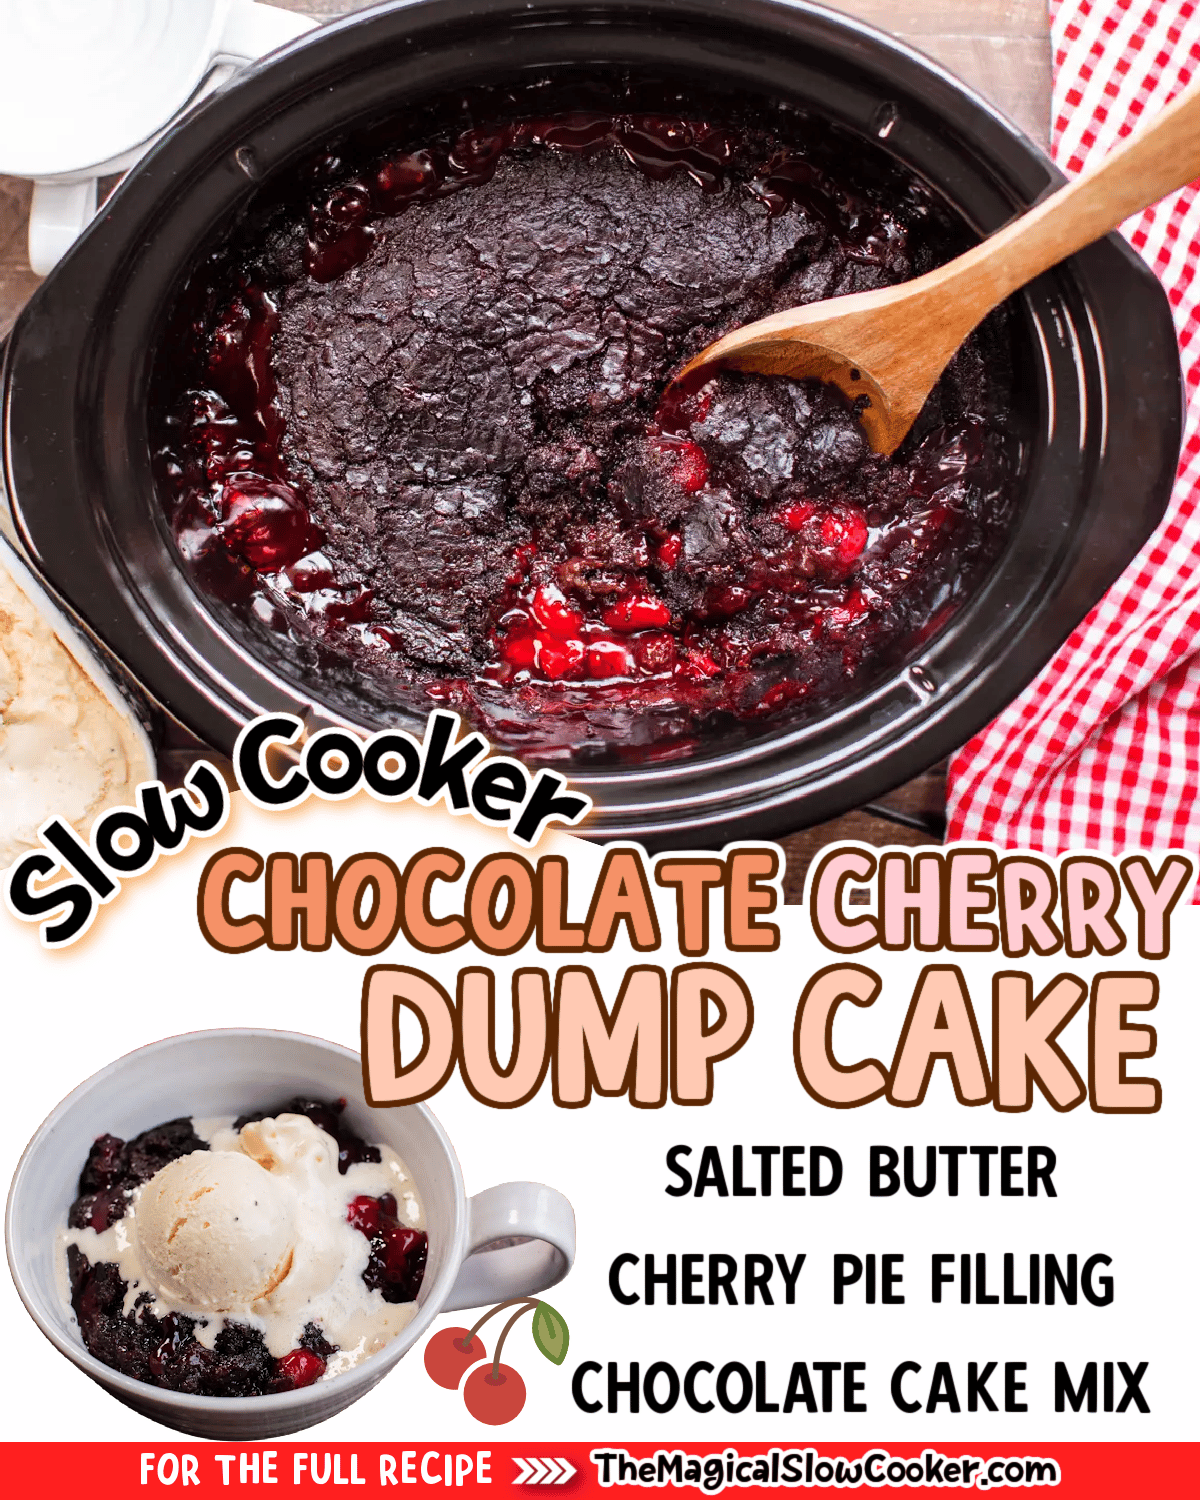 Collage of chocolate cherry dump cake with text of what the ingredients are.